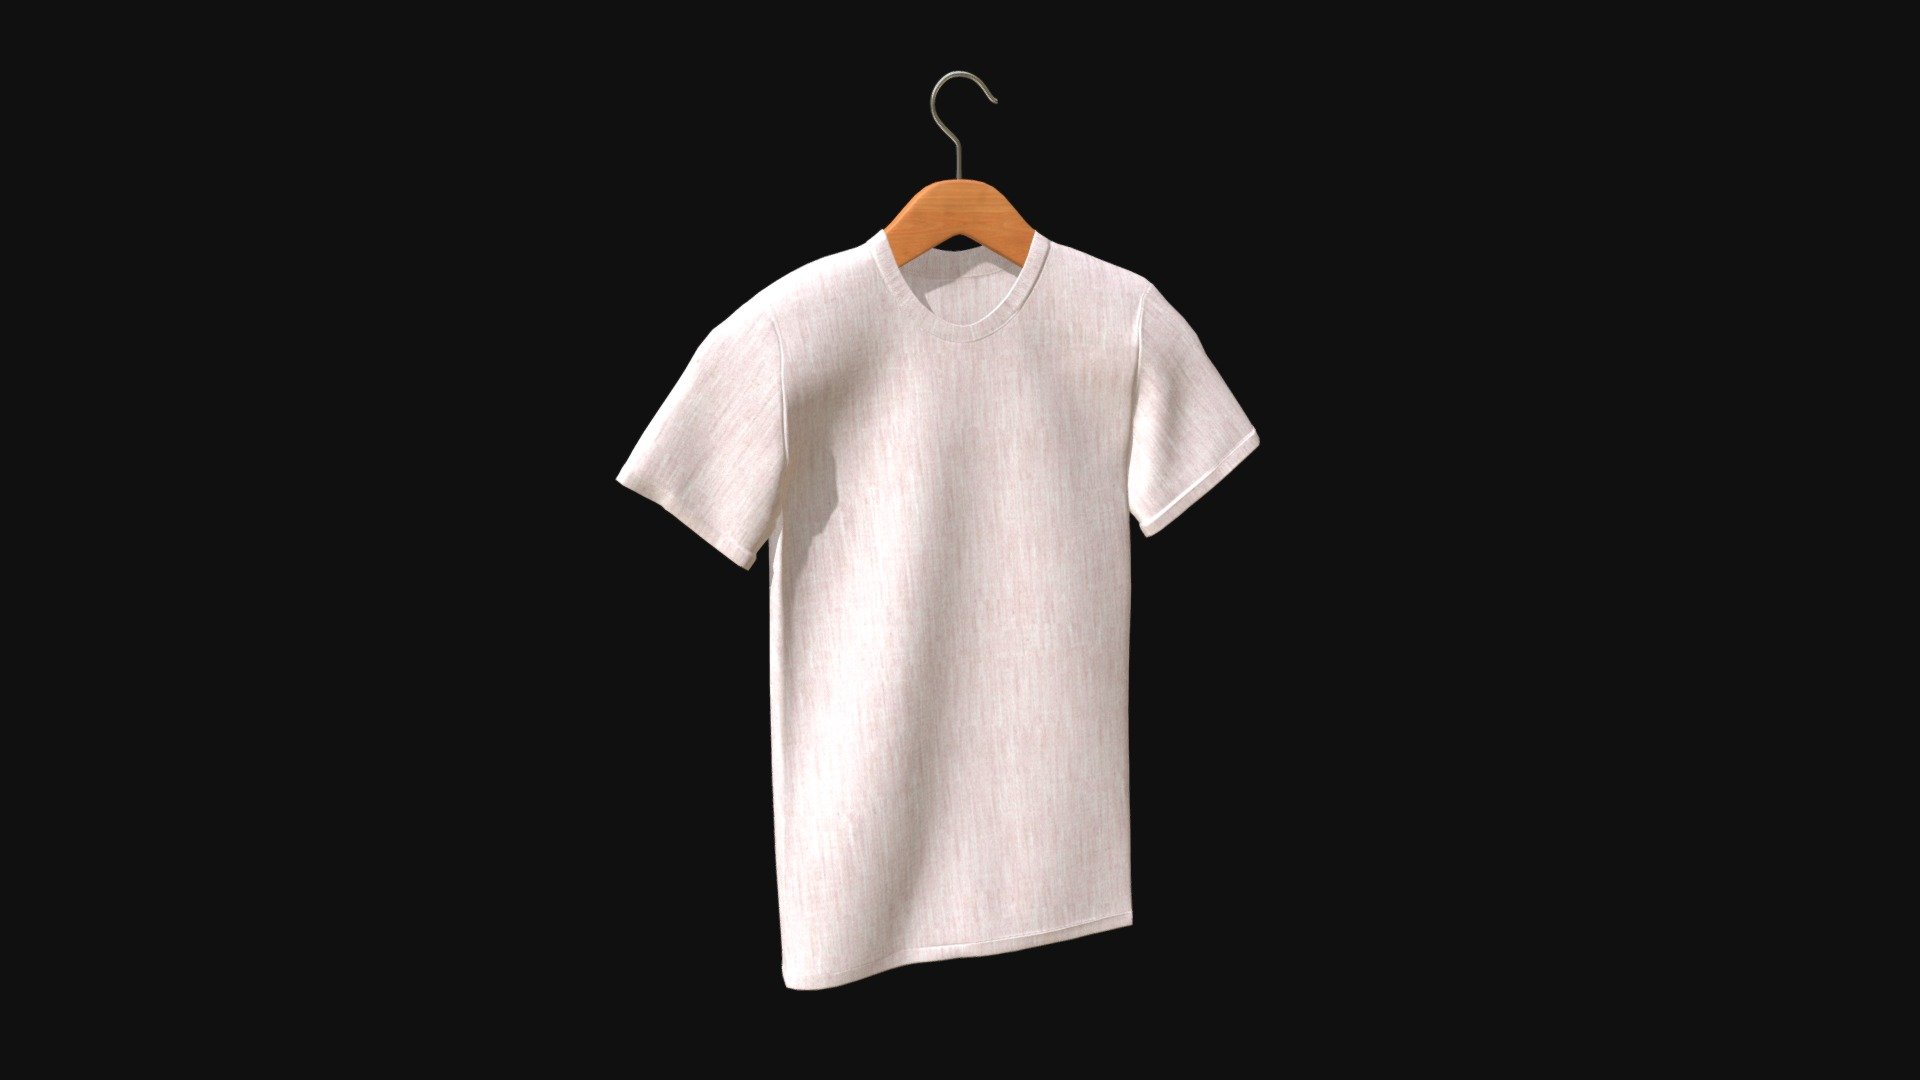 === The following description refers to the additional ZIP package provided with this model ===

T-Shirt on a coat hanger 3D Model. 2 individual objects, each one with its own non overlapping UV Layout map, Material and PBR Textures set. Production-ready 3D Model, with PBR materials, textures, non overlapping UV Layout map provided in the package.

Quads only geometries (no tris/ngons).

Formats included: FBX, OBJ; scenes: BLEND (with Cycles / Eevee PBR Materials and Textures); other: png with Alpha.

2 Objects (meshes), 2 PBR Materials, UV unwrapped (non overlapping UV Layout map provided in the package); UV-mapped Textures.

UV Layout maps and Image Textures resolutions: 2048x2048; PBR Textures made with Substance Painter.

Polygonal, QUADS ONLY (no tris/ngons); 15613 vertices, 15586 quad faces (31172 tris).

Real world dimensions; scene scale units: cm in Blender 3.3 (that is: Metric with 0.01 scale).

Uniform scale object (scale applied in Blender 3.3) 3d model